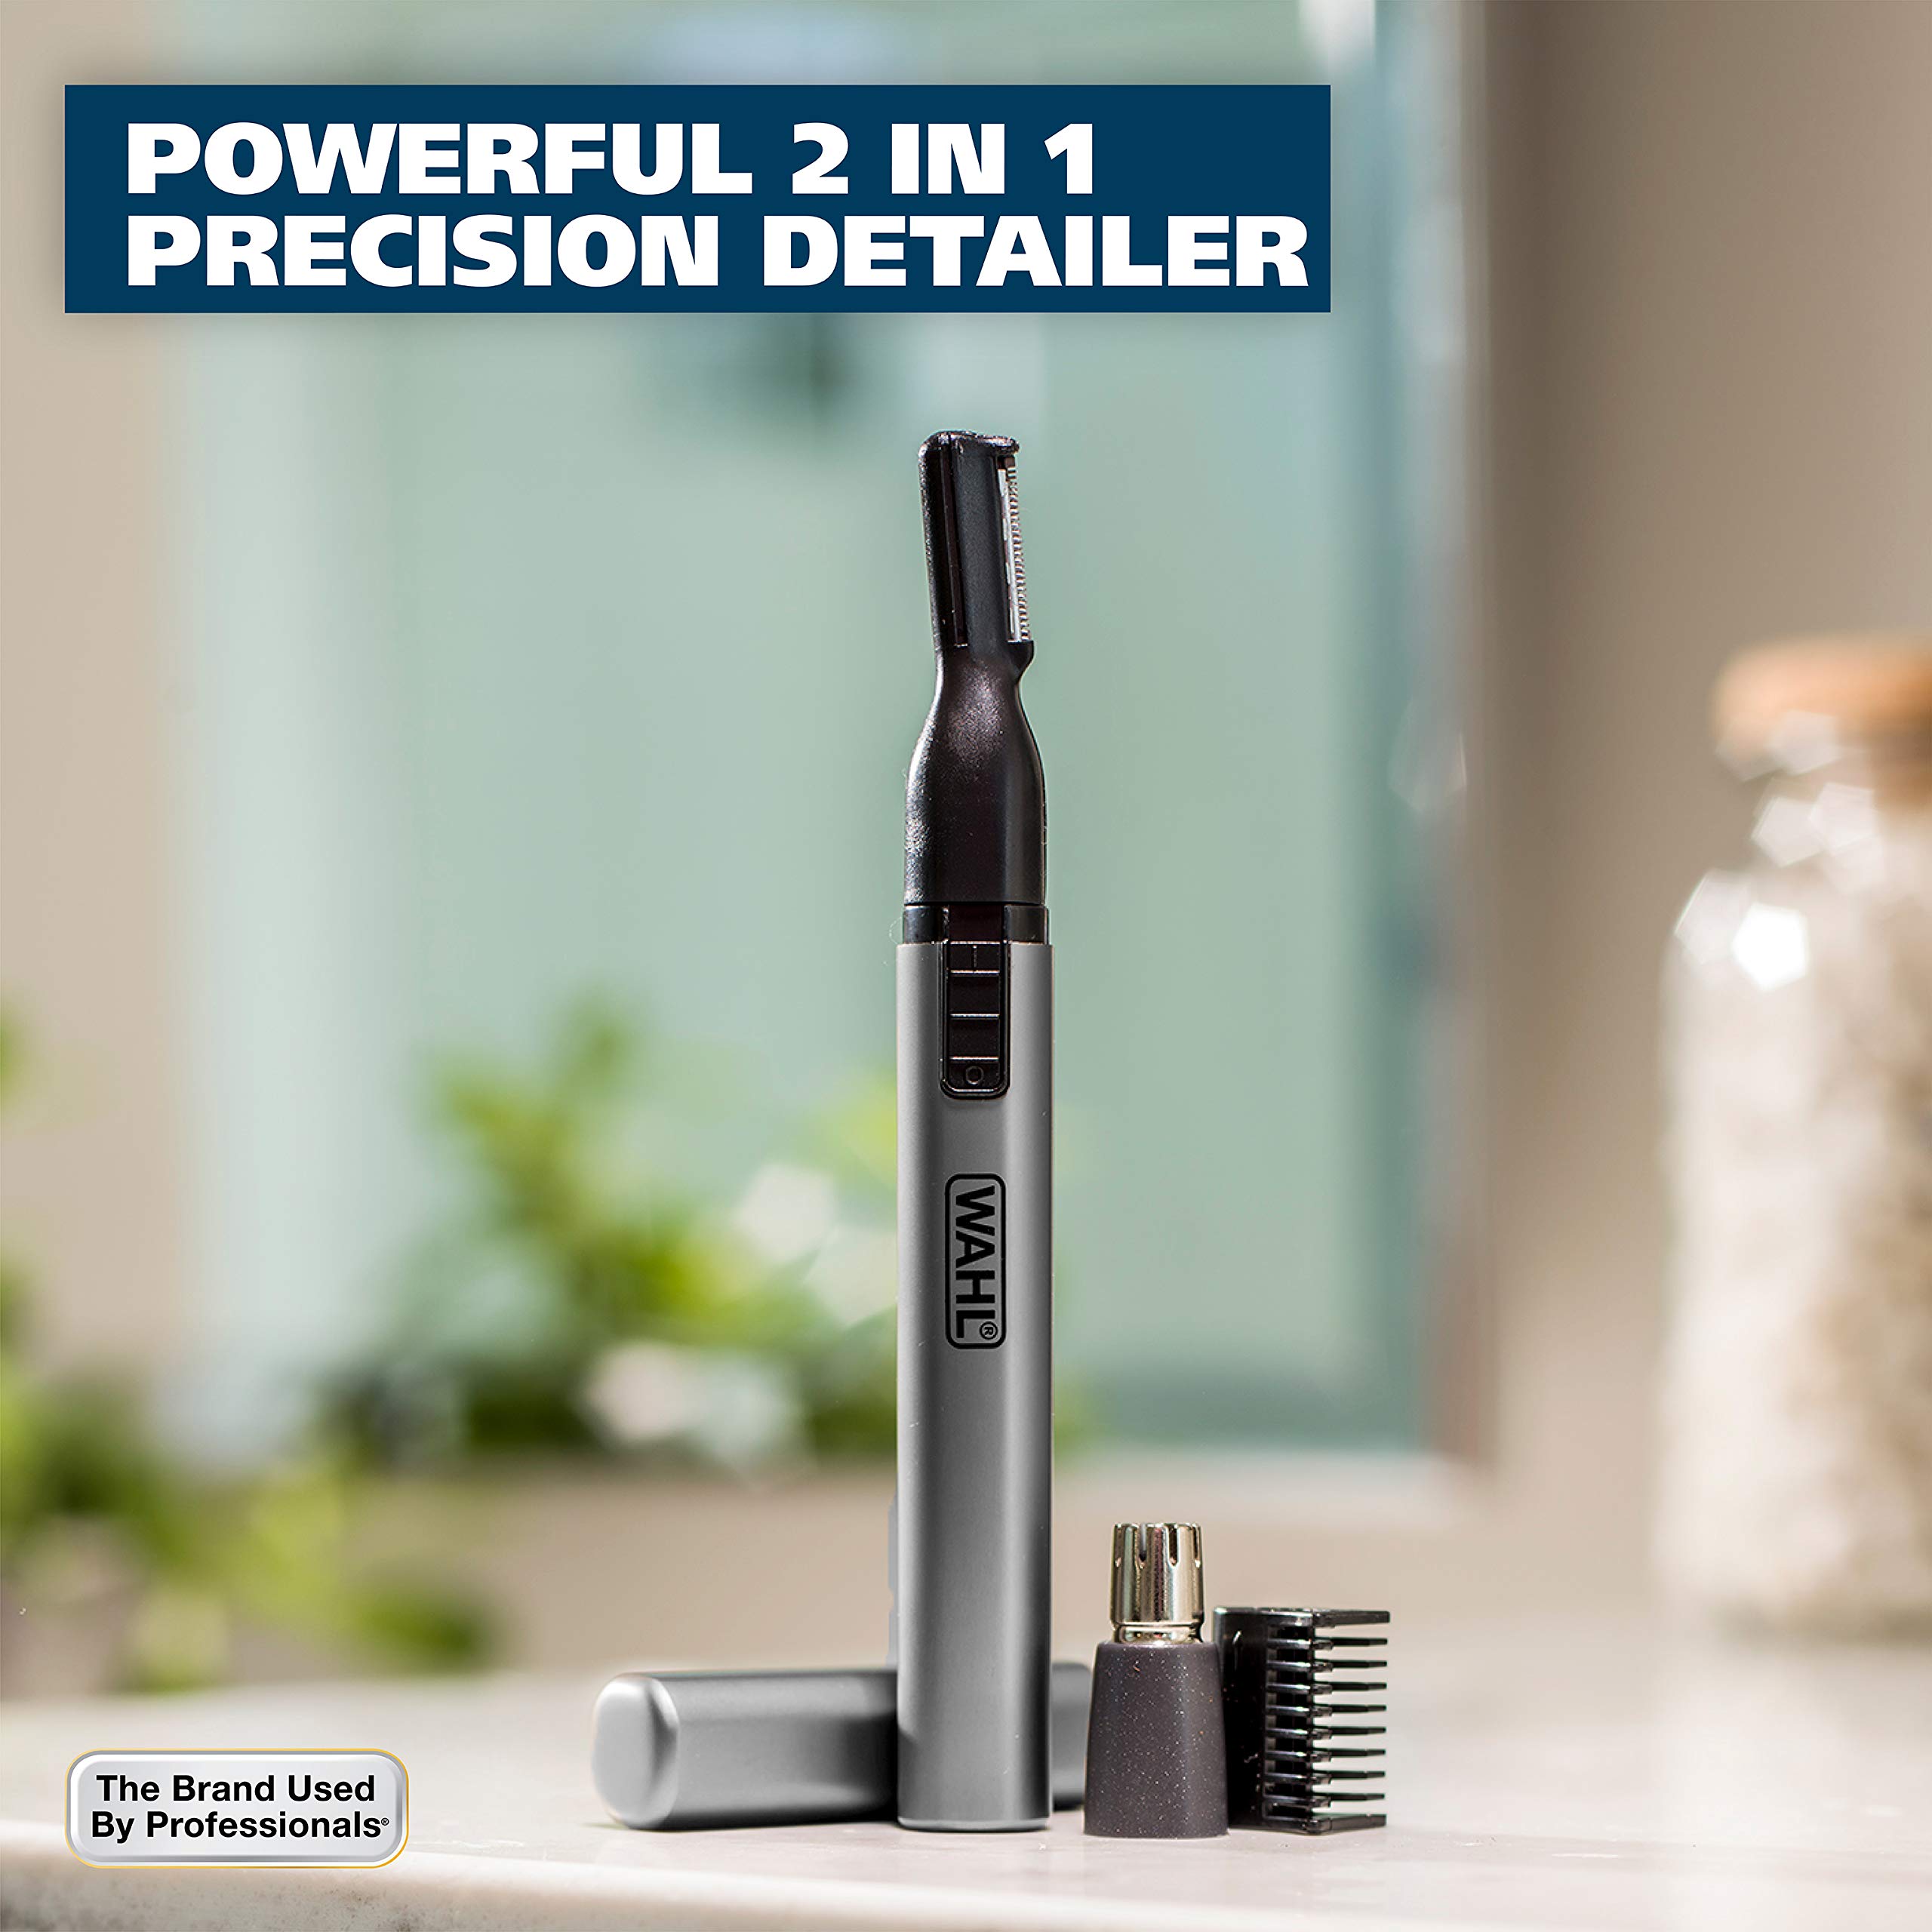 Wahl Micro Groomsman Battery Personal Trimmer & Detailer for Hygienic Grooming with Rinseable, Interchangeable Heads for Eyebrows, Neckline, Nose, Ears, & Other Detailing - 05640-600